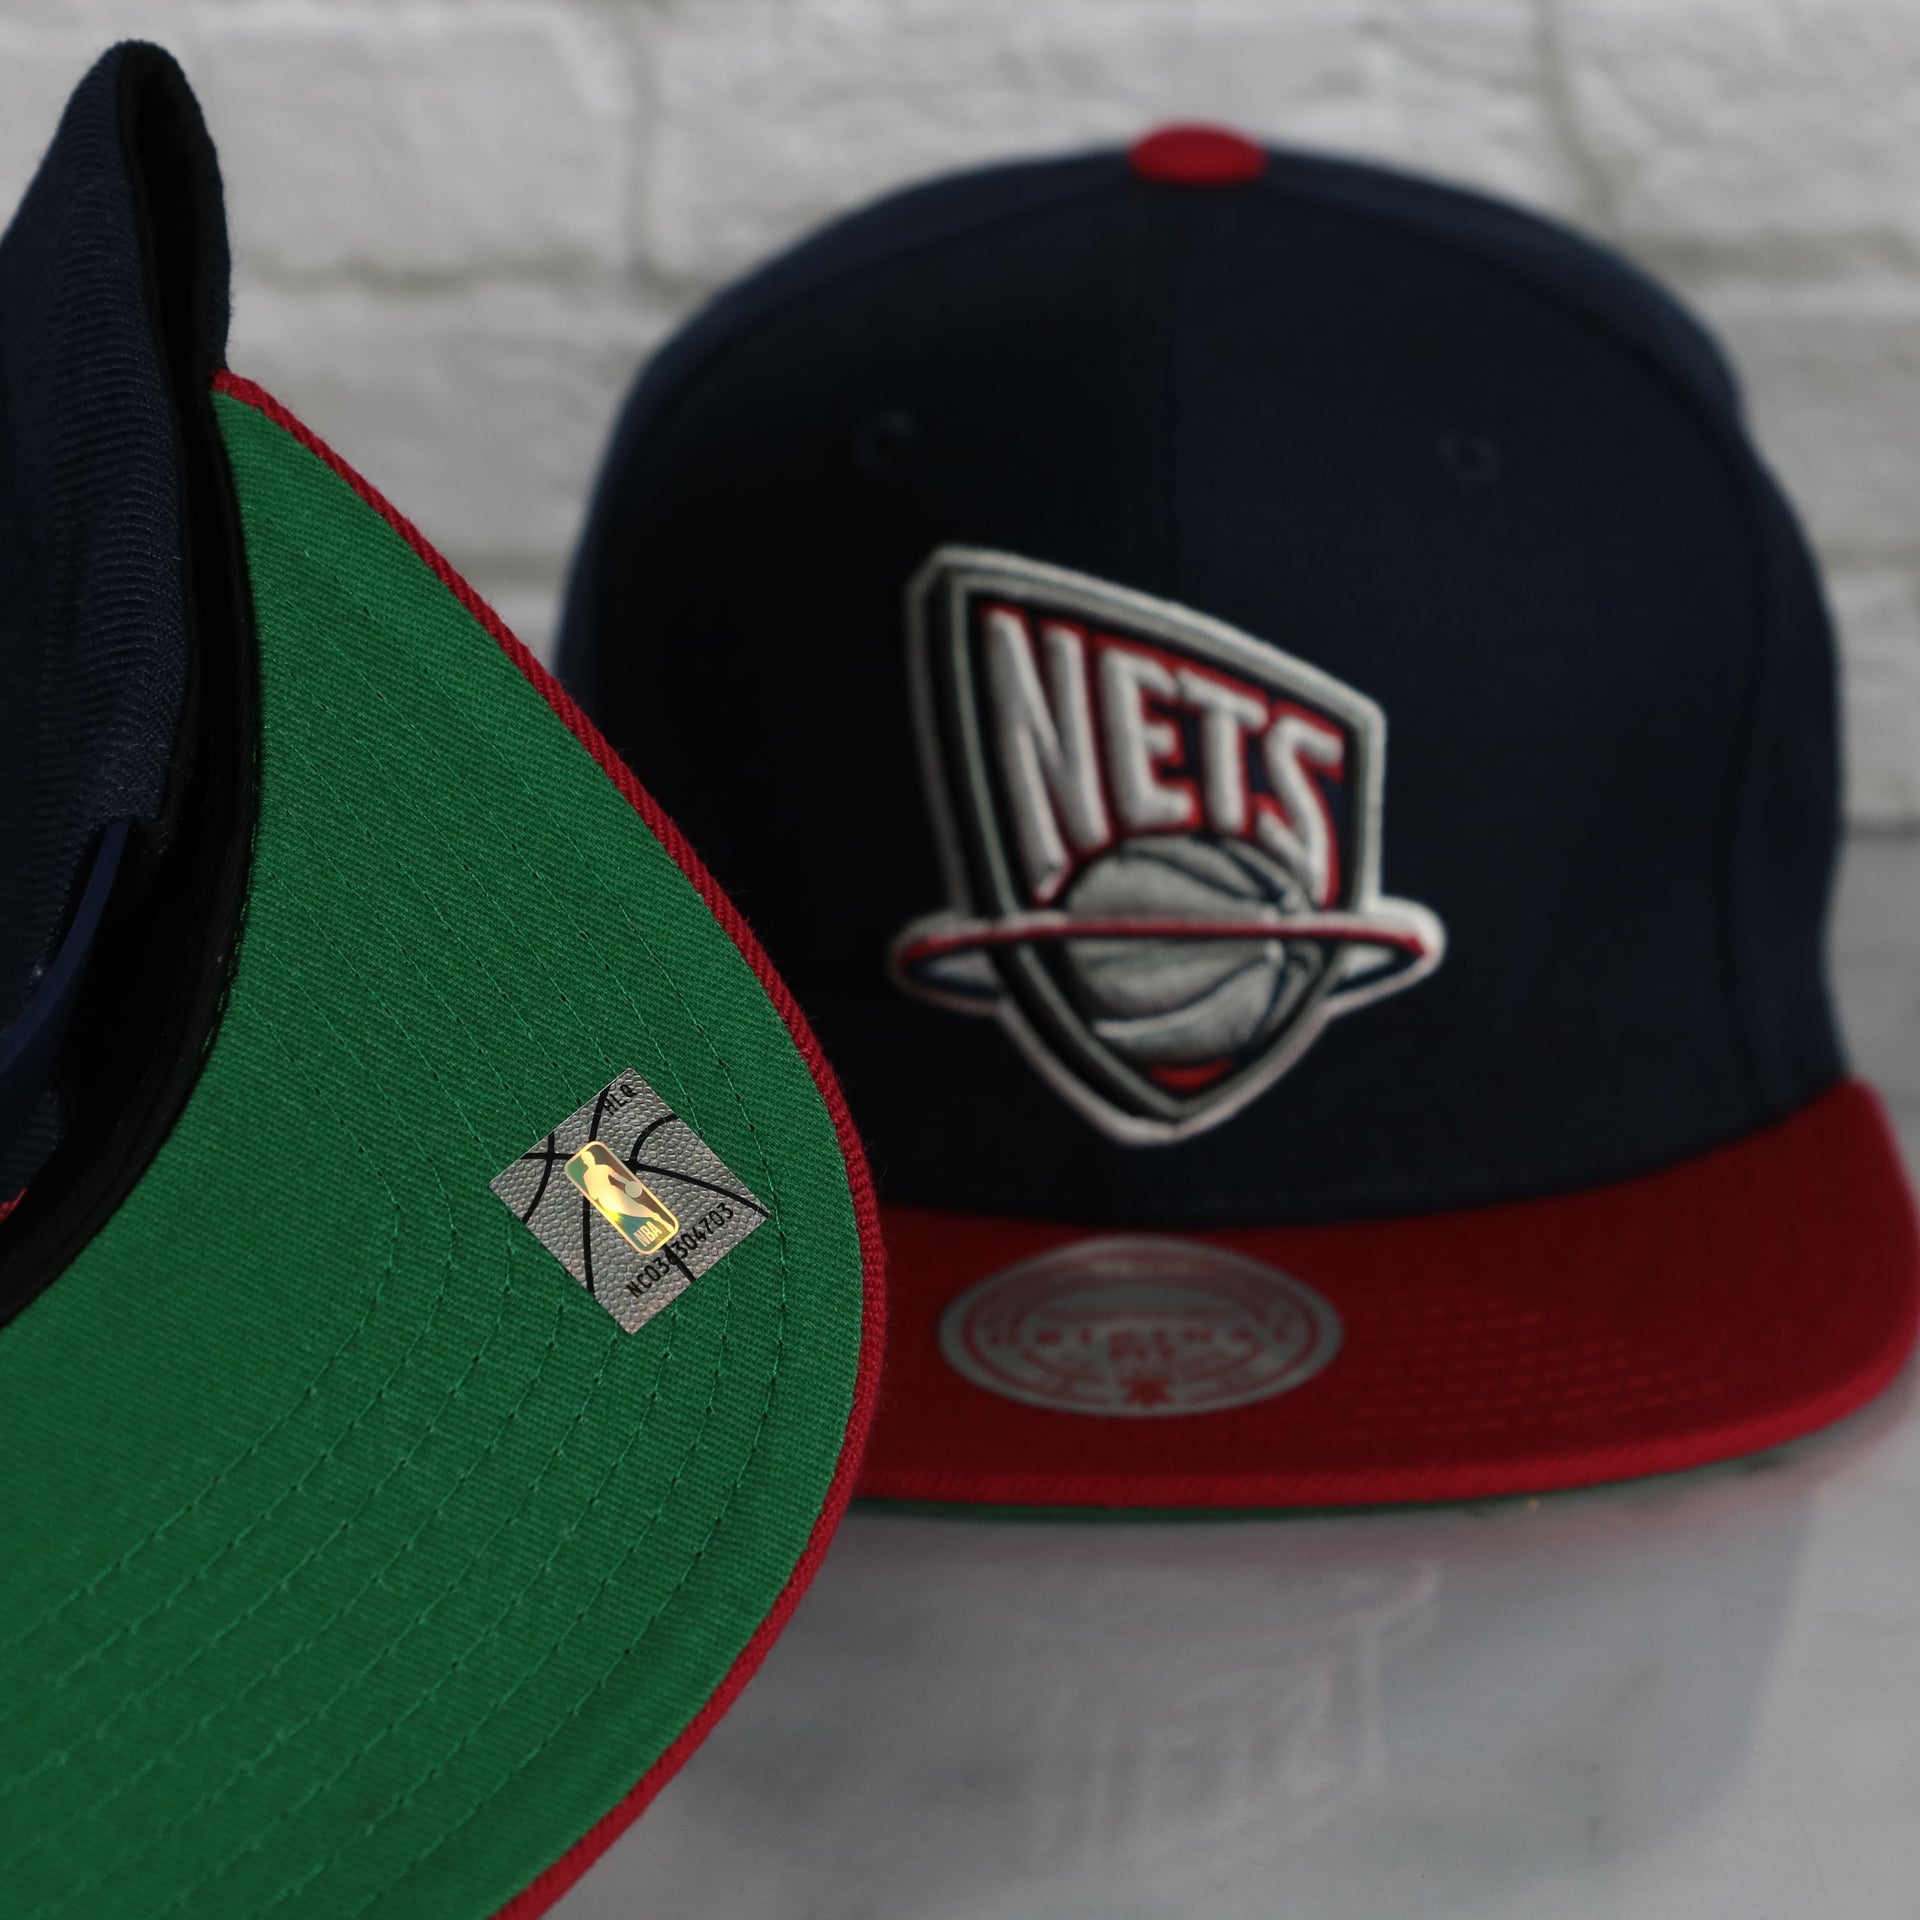 green under visor on the New Jersey Nets Vintage Retro NBA Team 2 Tone Mitchell and Ness Snapback Hat | Navy/Red